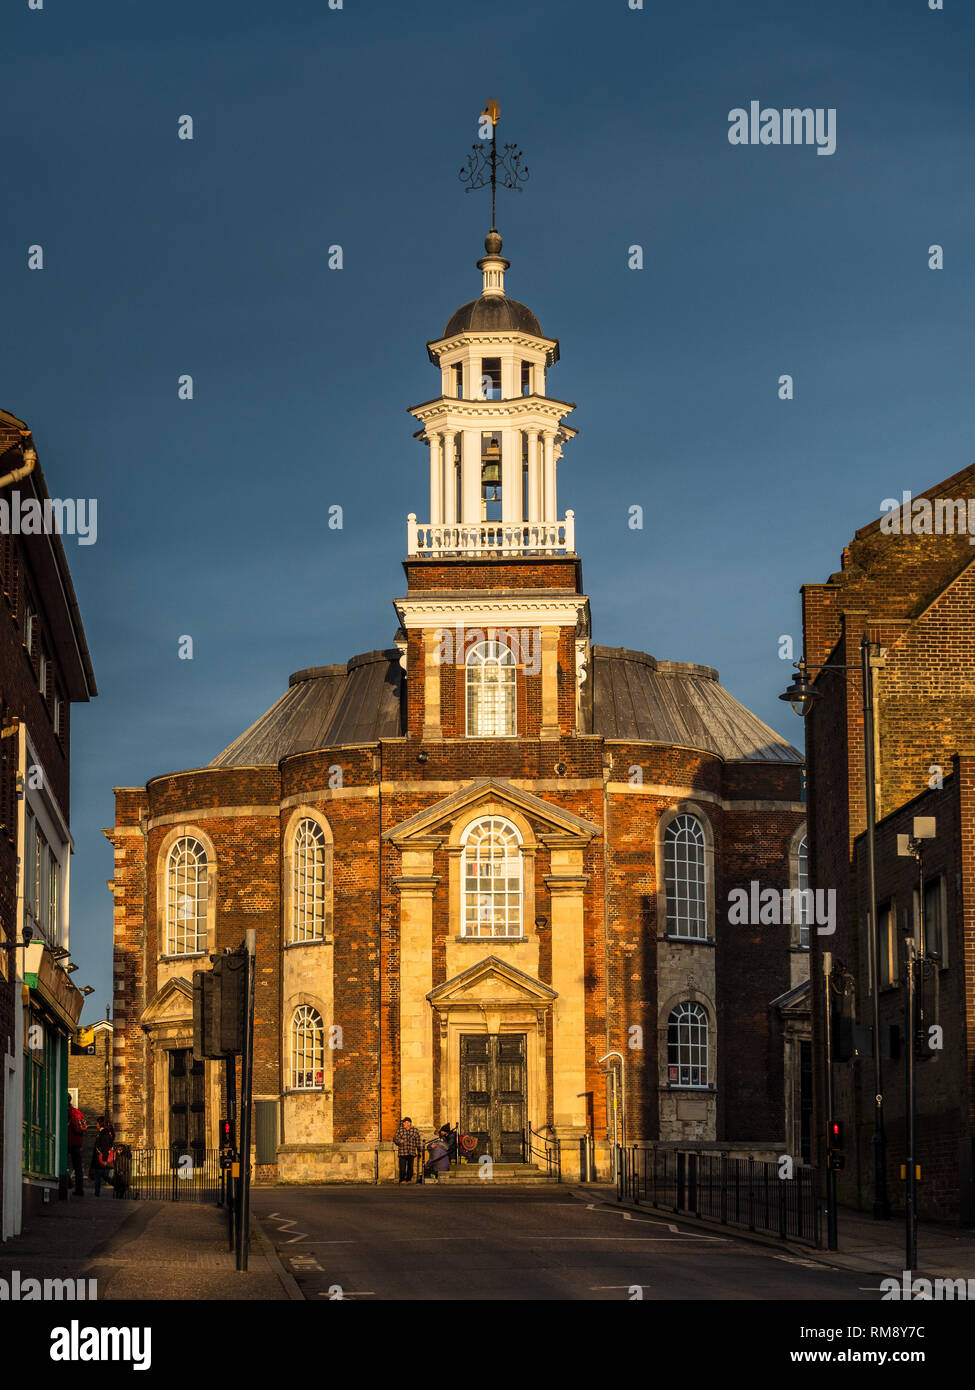 St George's Theatre Great Yarmouth - a former Georgian Chapel built in 1714-21. Restored as a theatre and community centre in 2013 Hopkins Architects Stock Photo